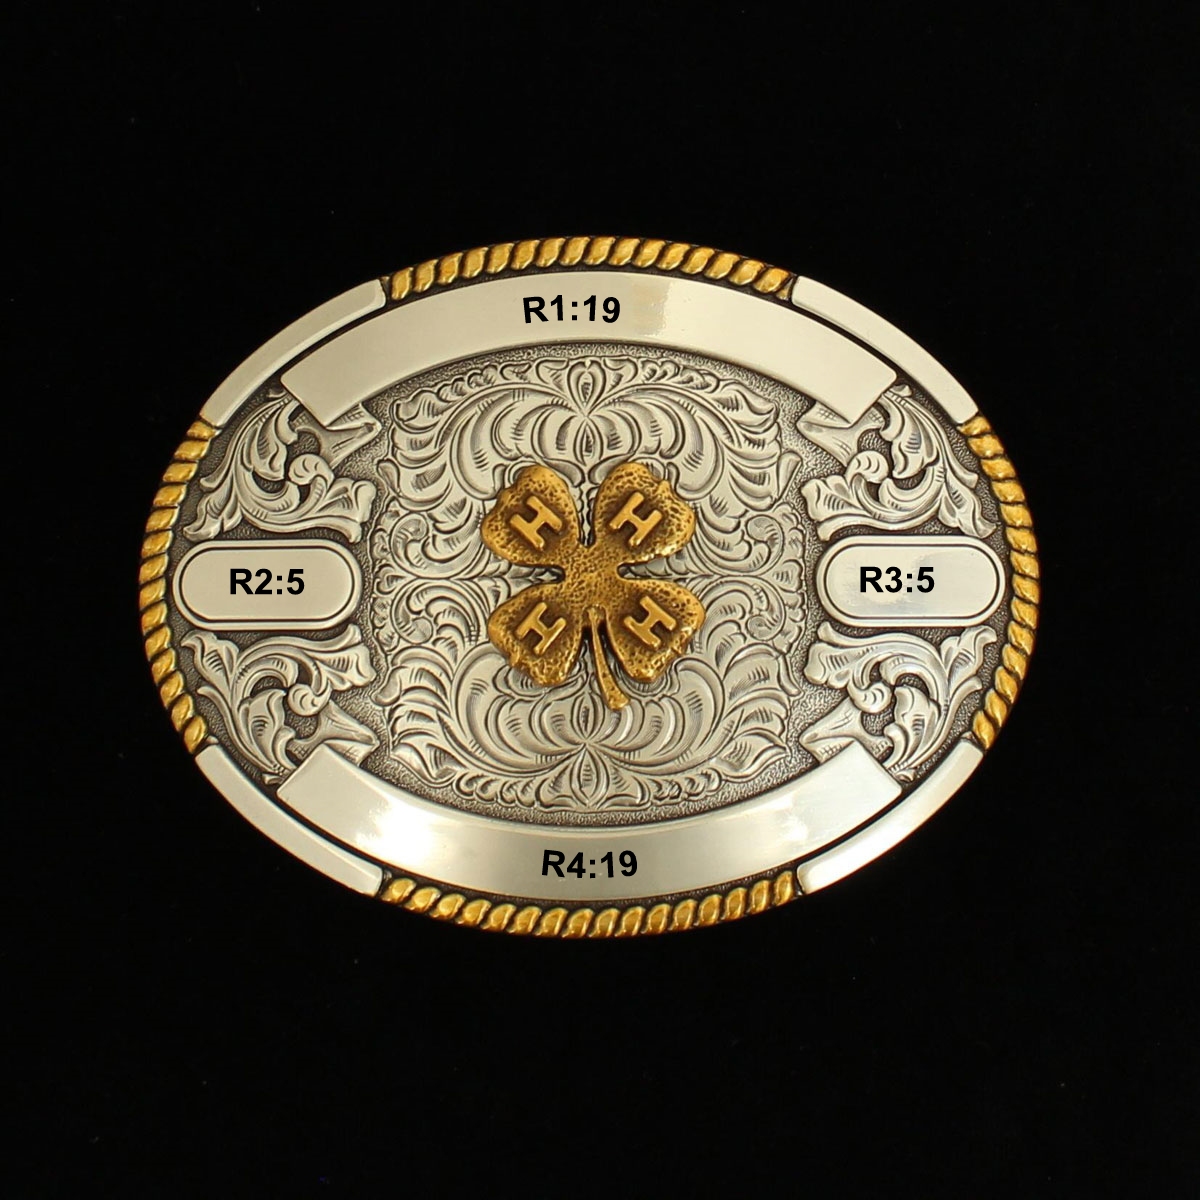 MF-38636 Trophy Buckle Oval 4H Clover 4 Ribbons 3-1/2x4-1/2